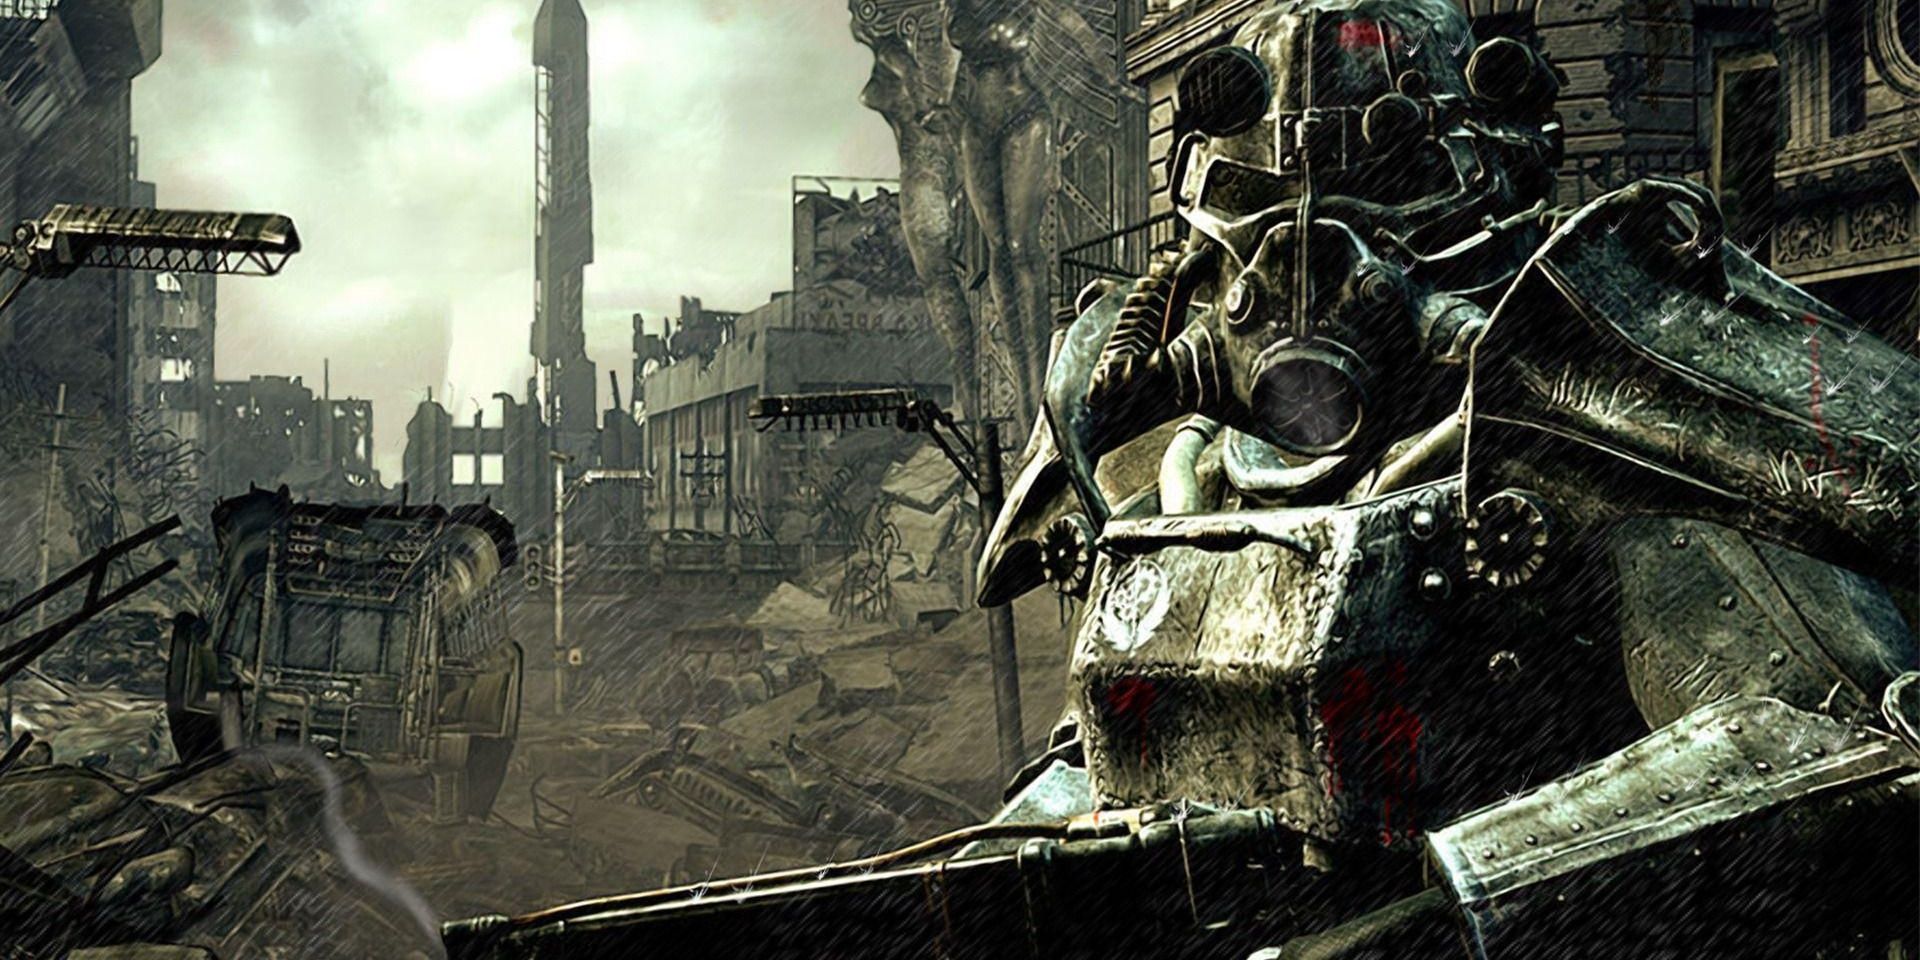 A man in power armor stands among the rubble of Washington in Fallout 3